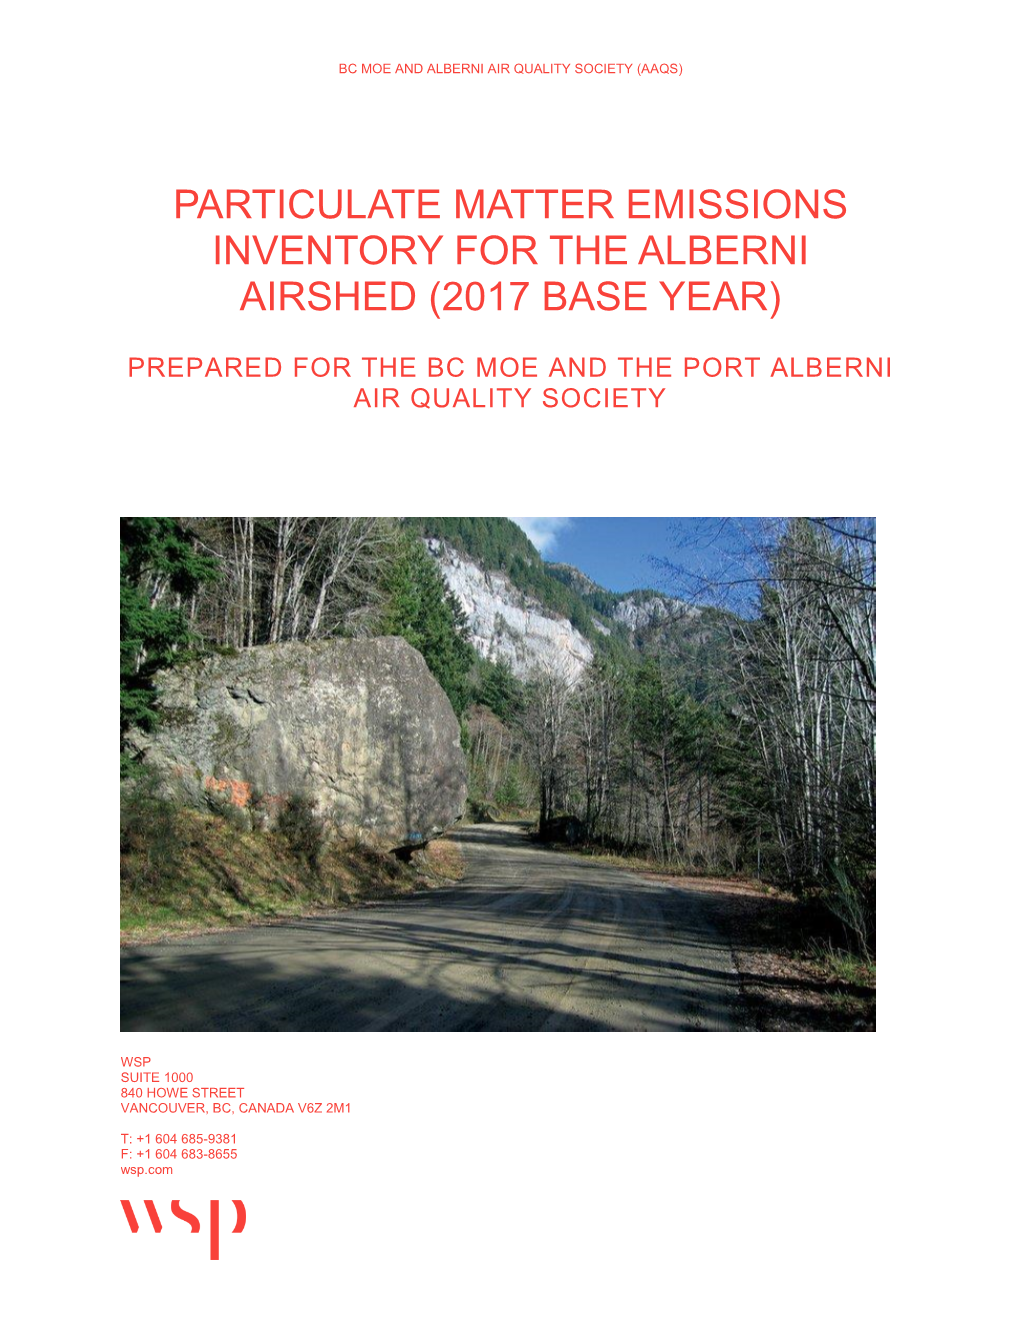 Alberni Airshed Emissions Inventory 2017